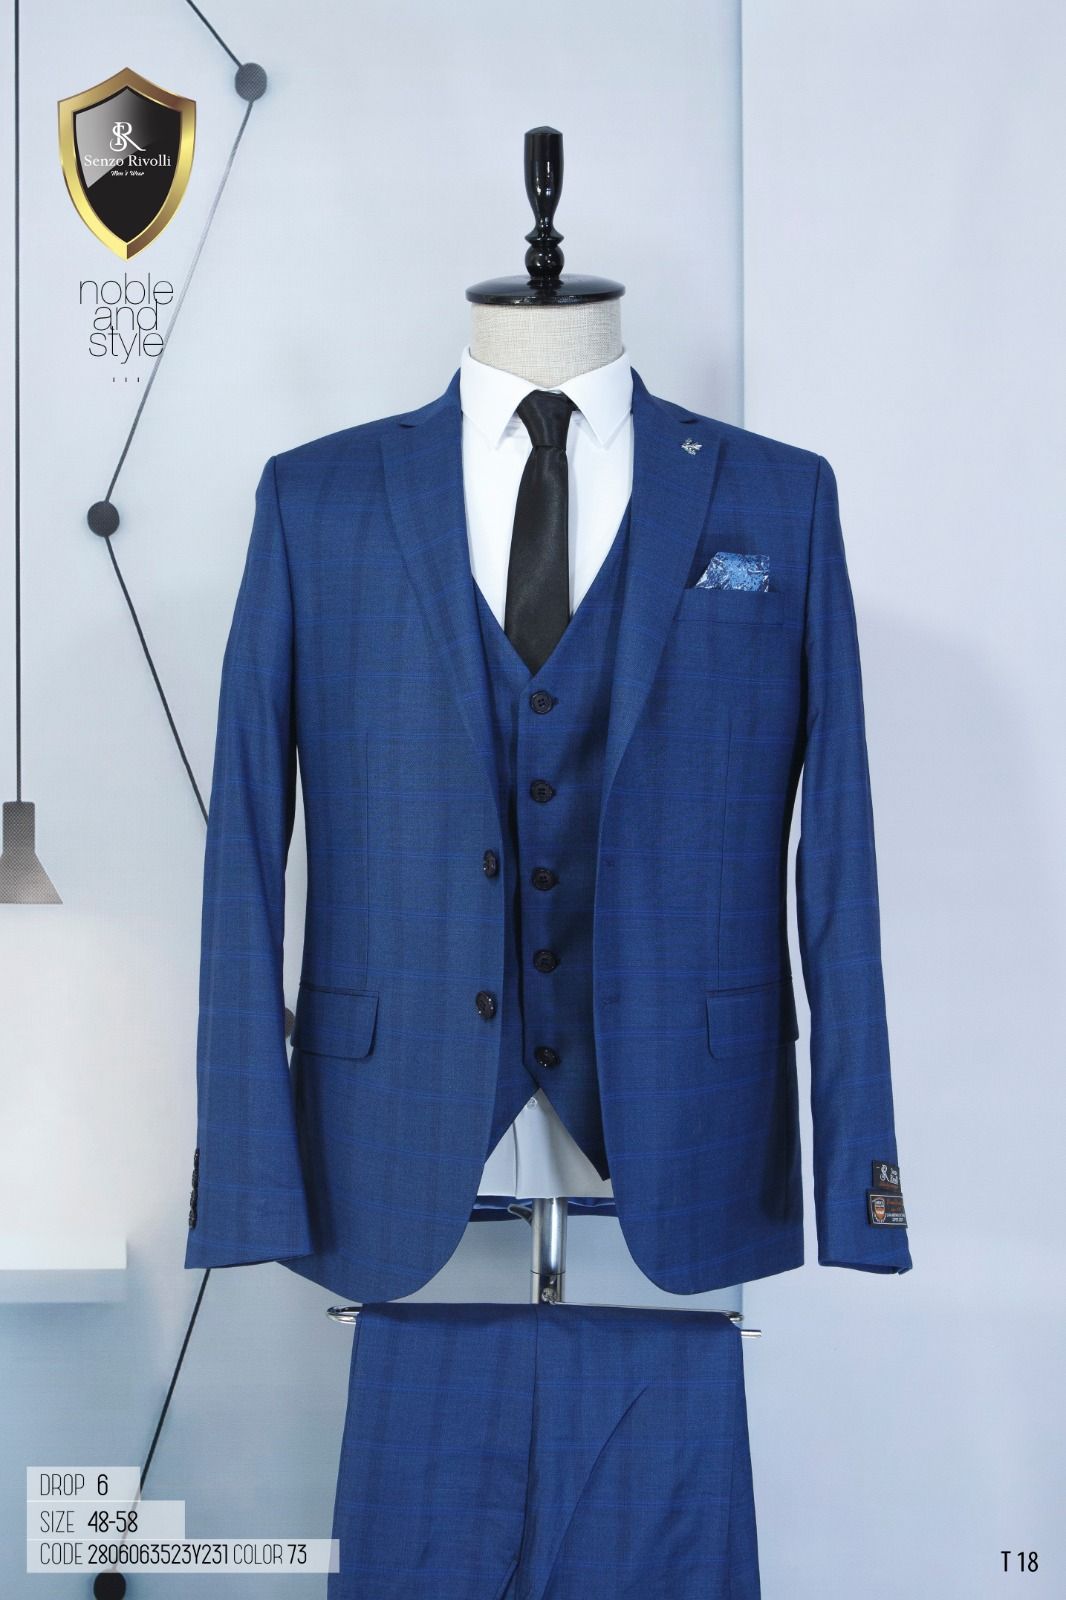 EXECUTIVE BLUE STRIPPED 3 PIECE TURKEY SUIT WITH 2 BLACK BUTTON-deluxe.com.ng